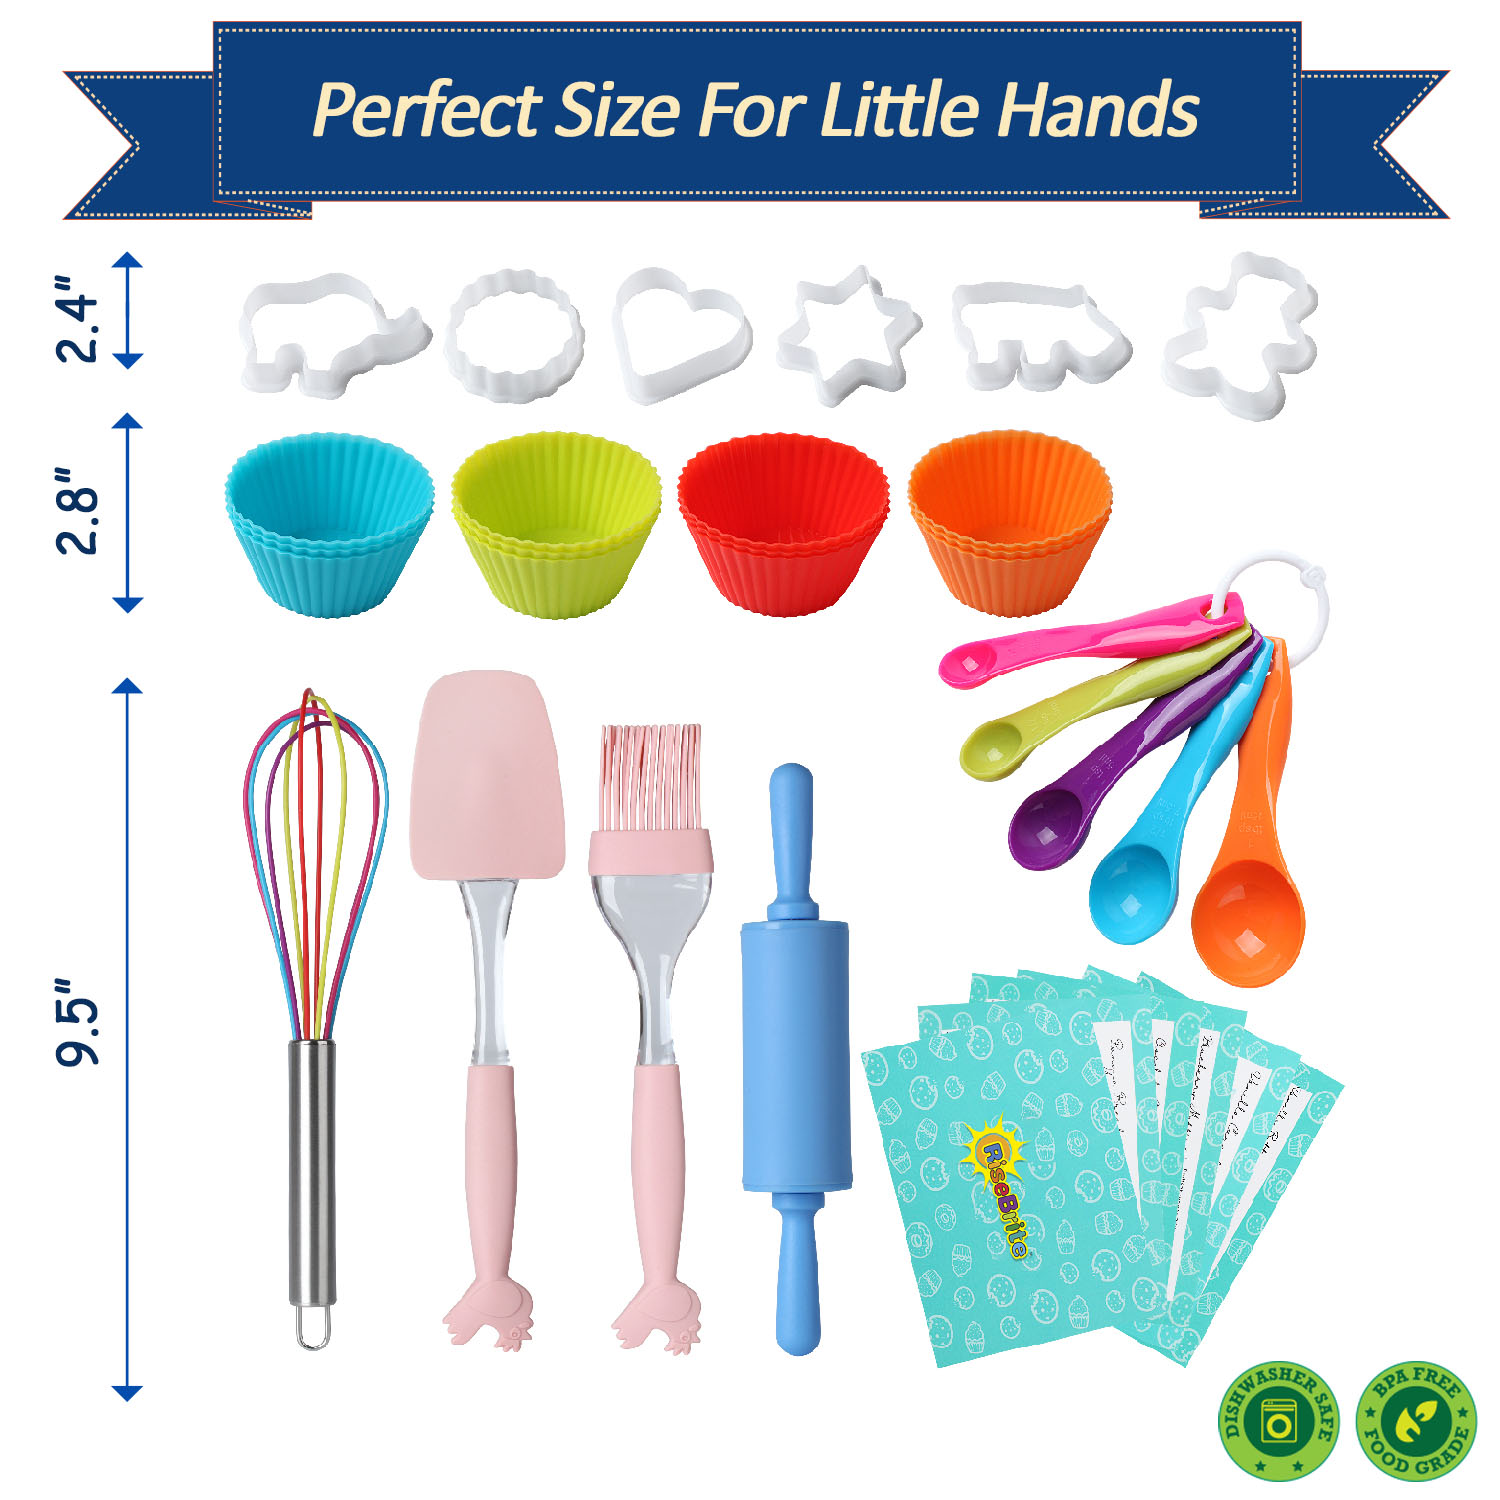 RiseBrite Kids Baking Set Utensils Are Colorful And Sized To Fit Small Hands